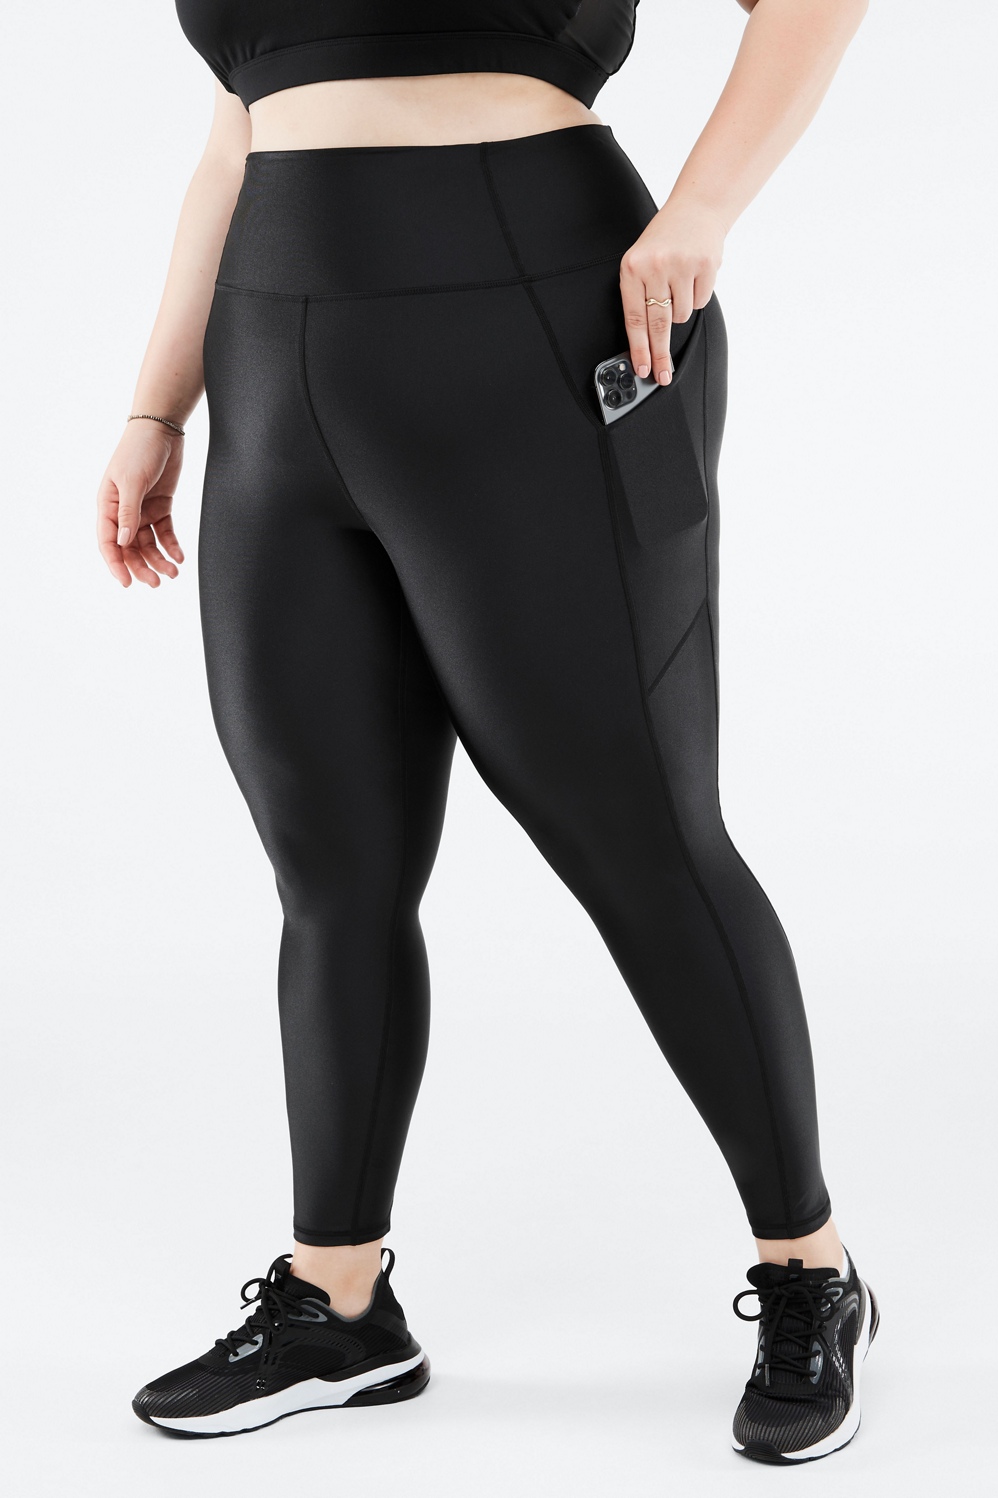 Fabletics Legging, High Waisted PureLuxe Crossover 7/8, Black, Size- LG.  Ret $74